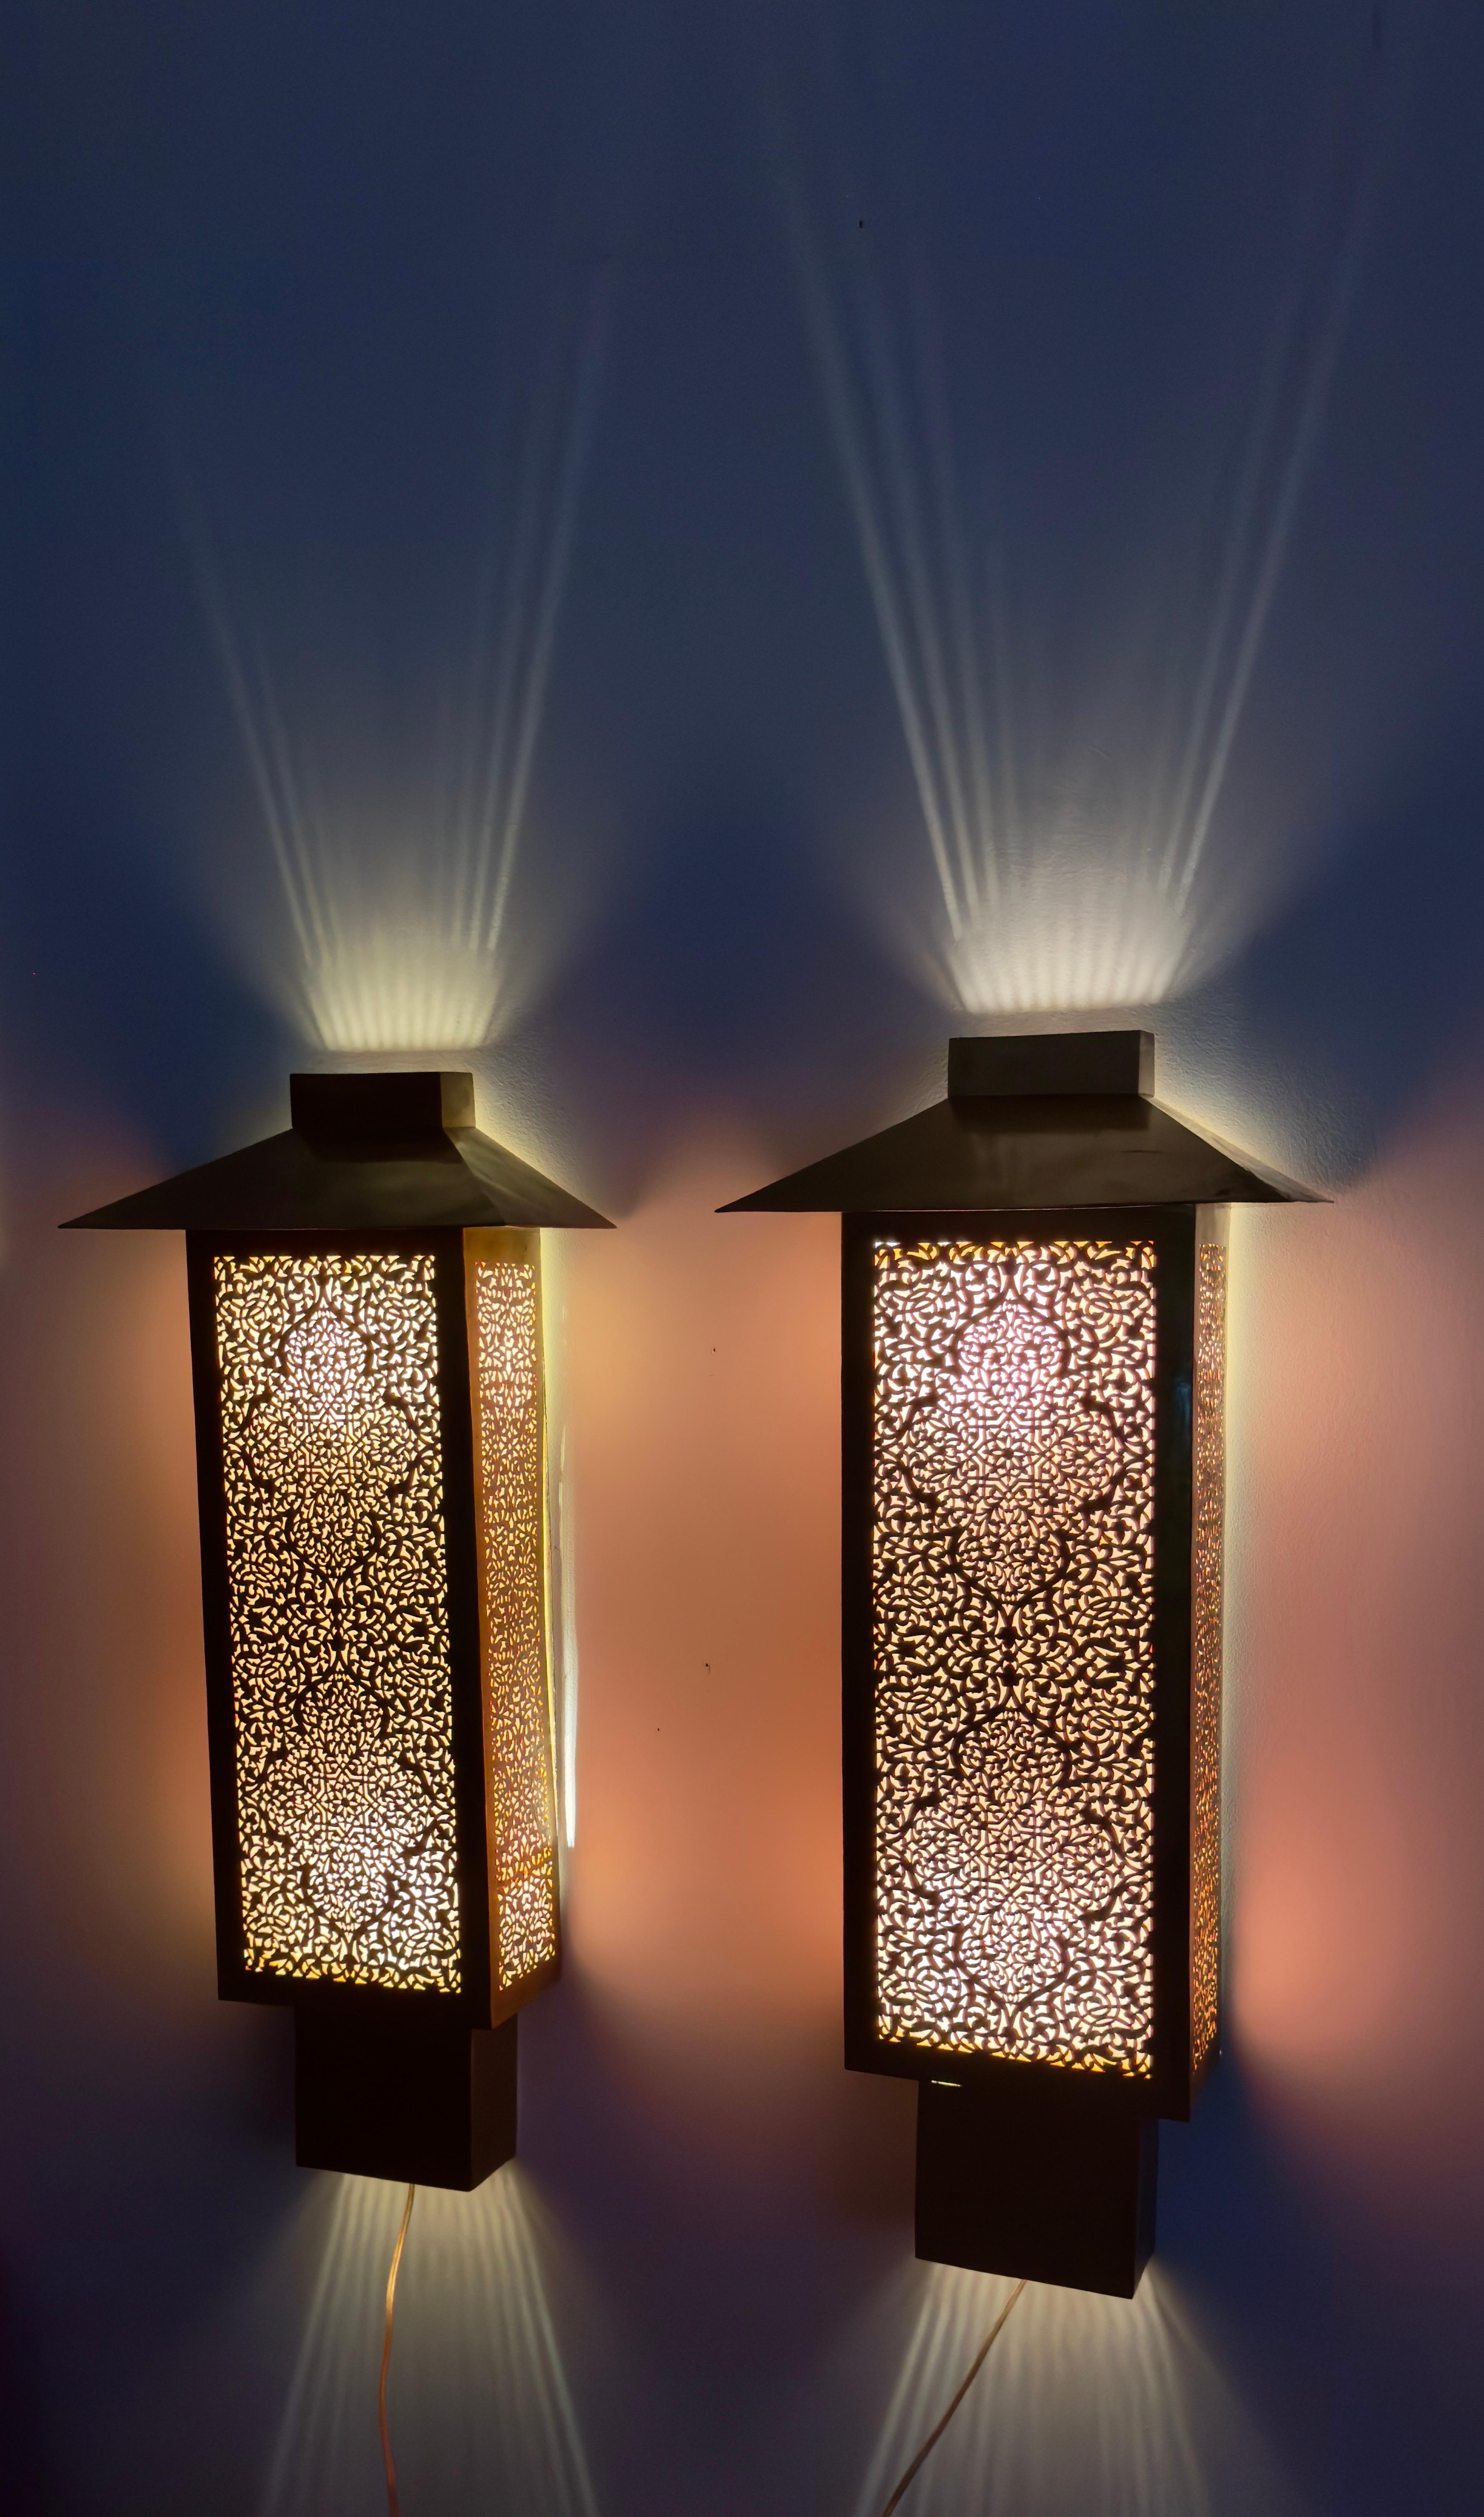 Featuring a large, sturdy base and lean, rectangular dimensions, this pair of authentically handcrafted chimney-style brass sconces will delight the senses with its exotically rendered filigree work and soft filtered light. The intricate details